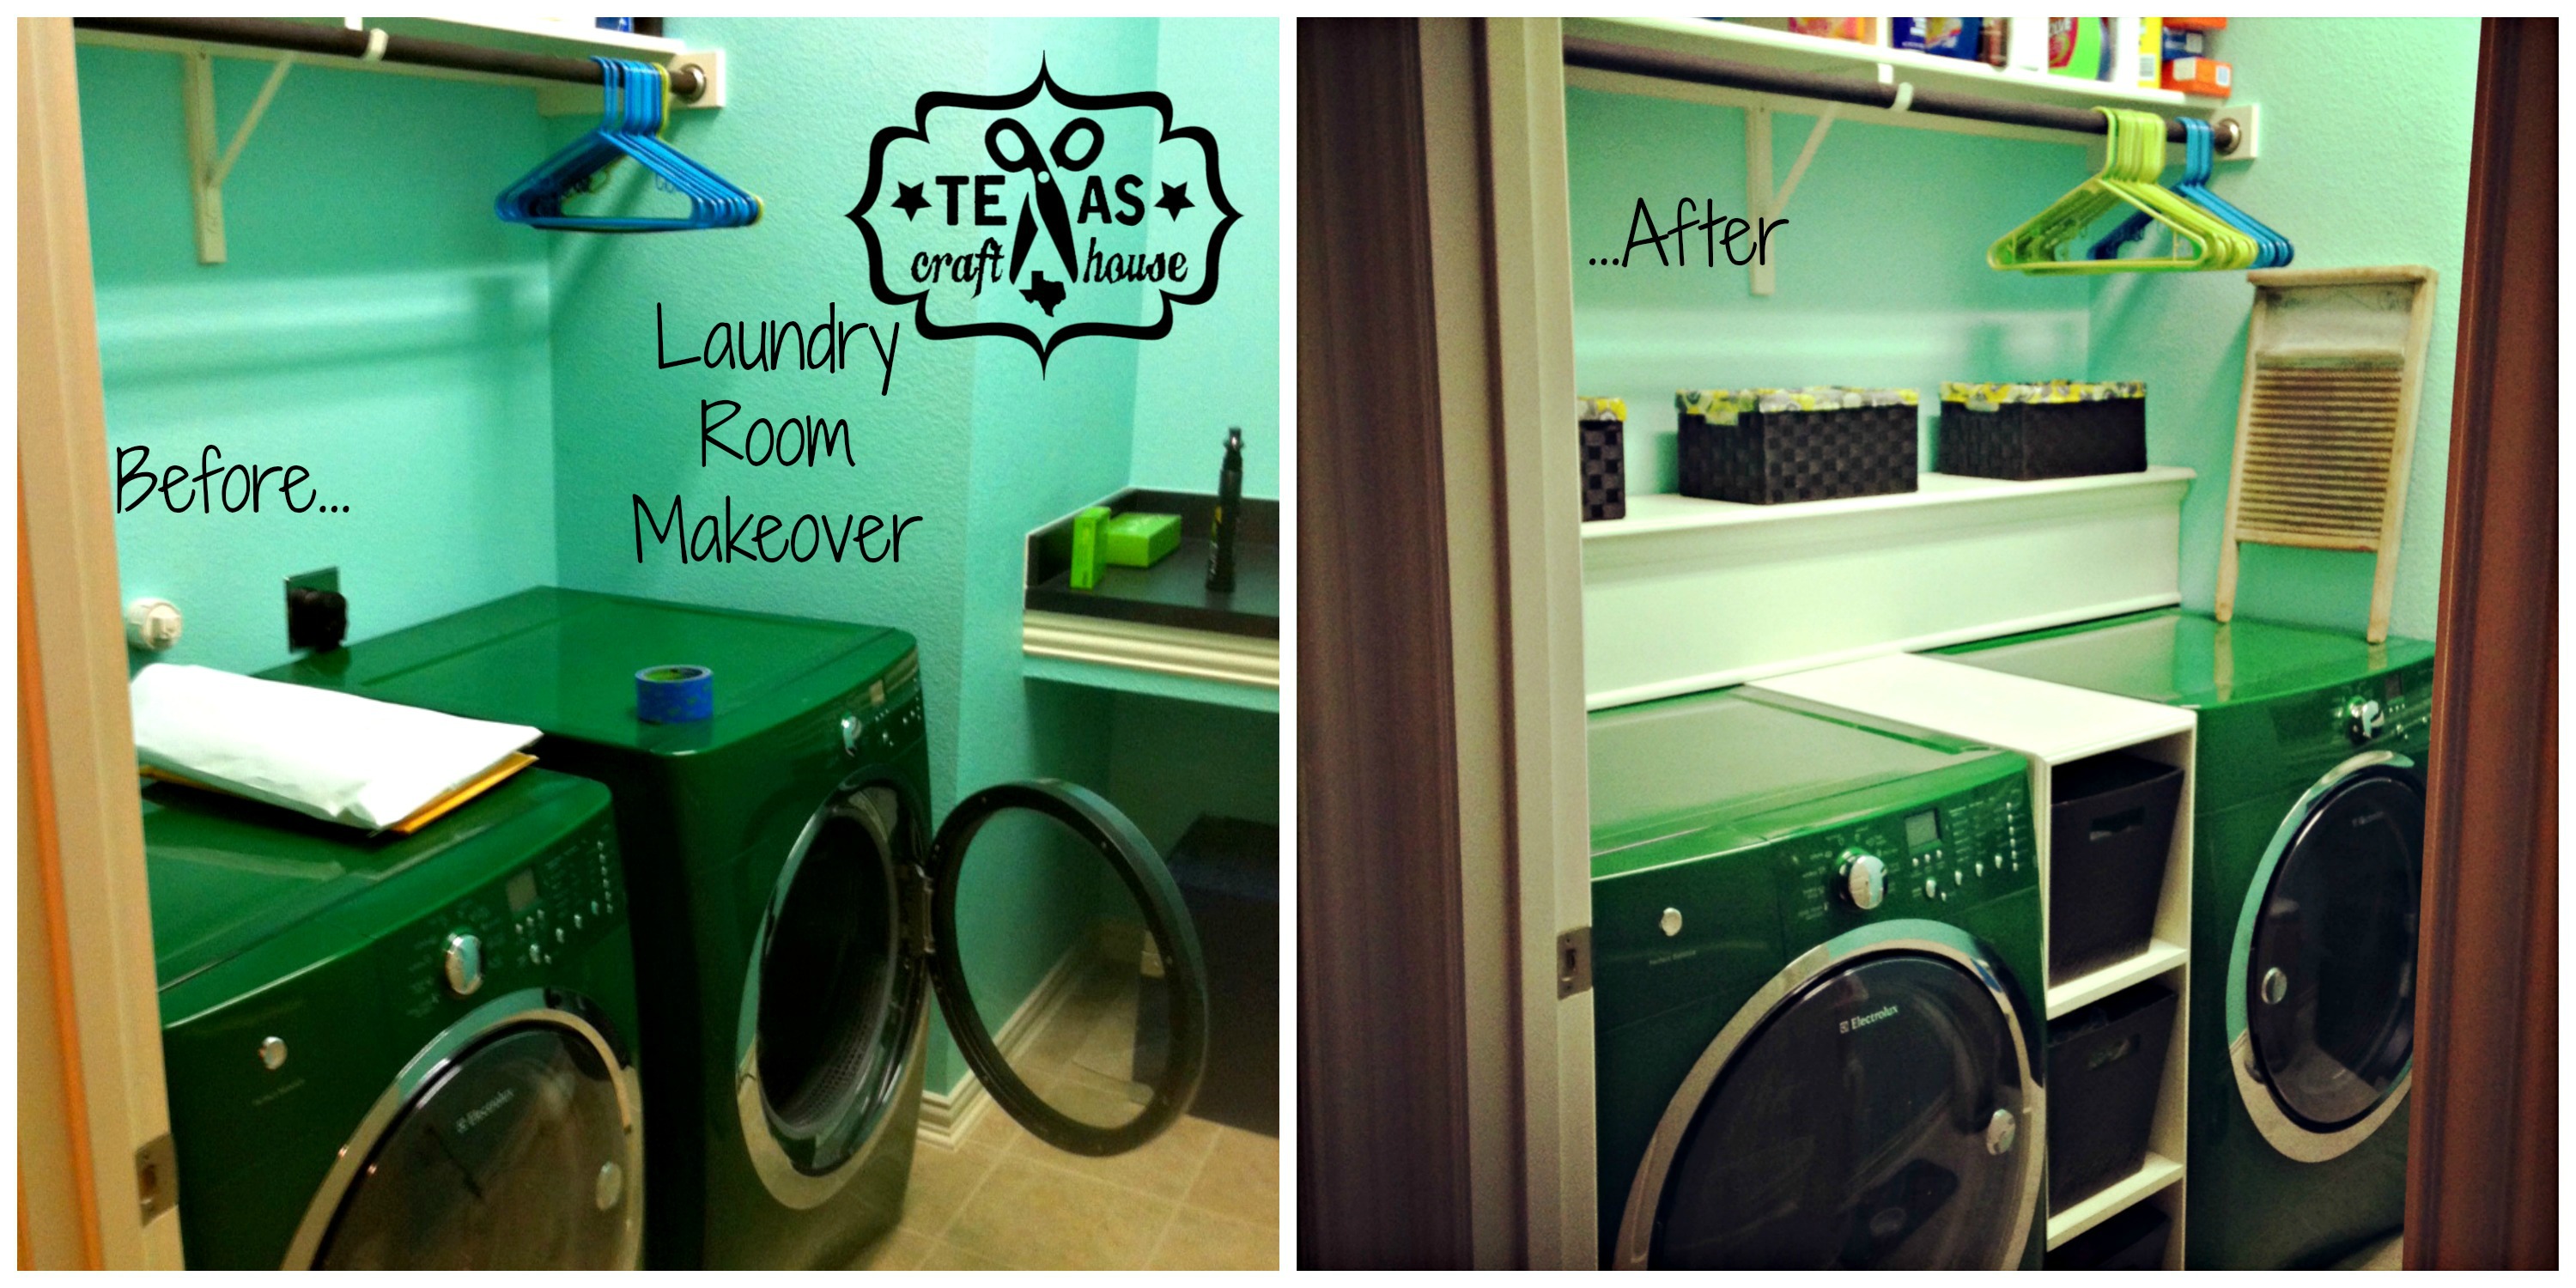 {Texas Craft House} Laundry Room Makeover: Washer & Dryer Storage How-to